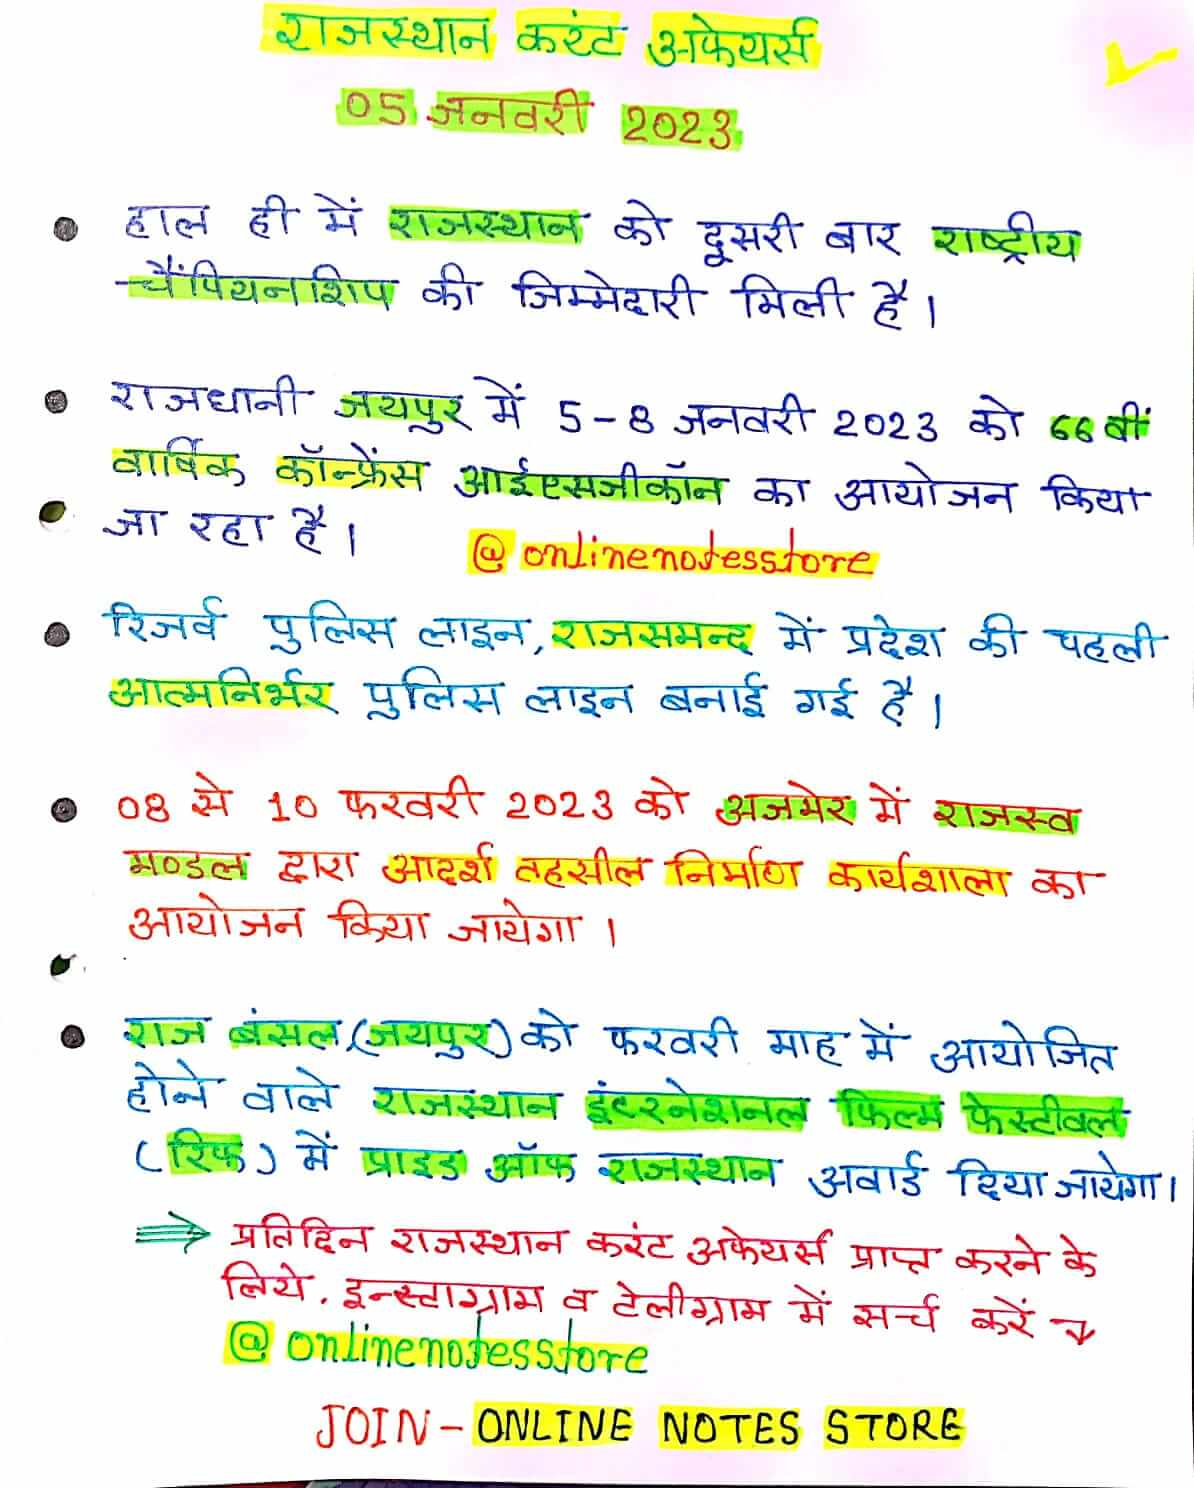 01-10 January 2023 Rajasthan Current Affairs in Hindi PDF |01-10 January 2023 करंट अफेयर्स | Rajasthan Current Affairs Quiz 01-10 January 2023 | Today Current Affairs 01-10 January 2023 | Current Affairs India - 01-10 January 2023 | Current Affairs in Hindi | Today Current Affairs Questions PDF | Current Affairs - Online Notes Store | Rajasthan Current Affairs - 2022